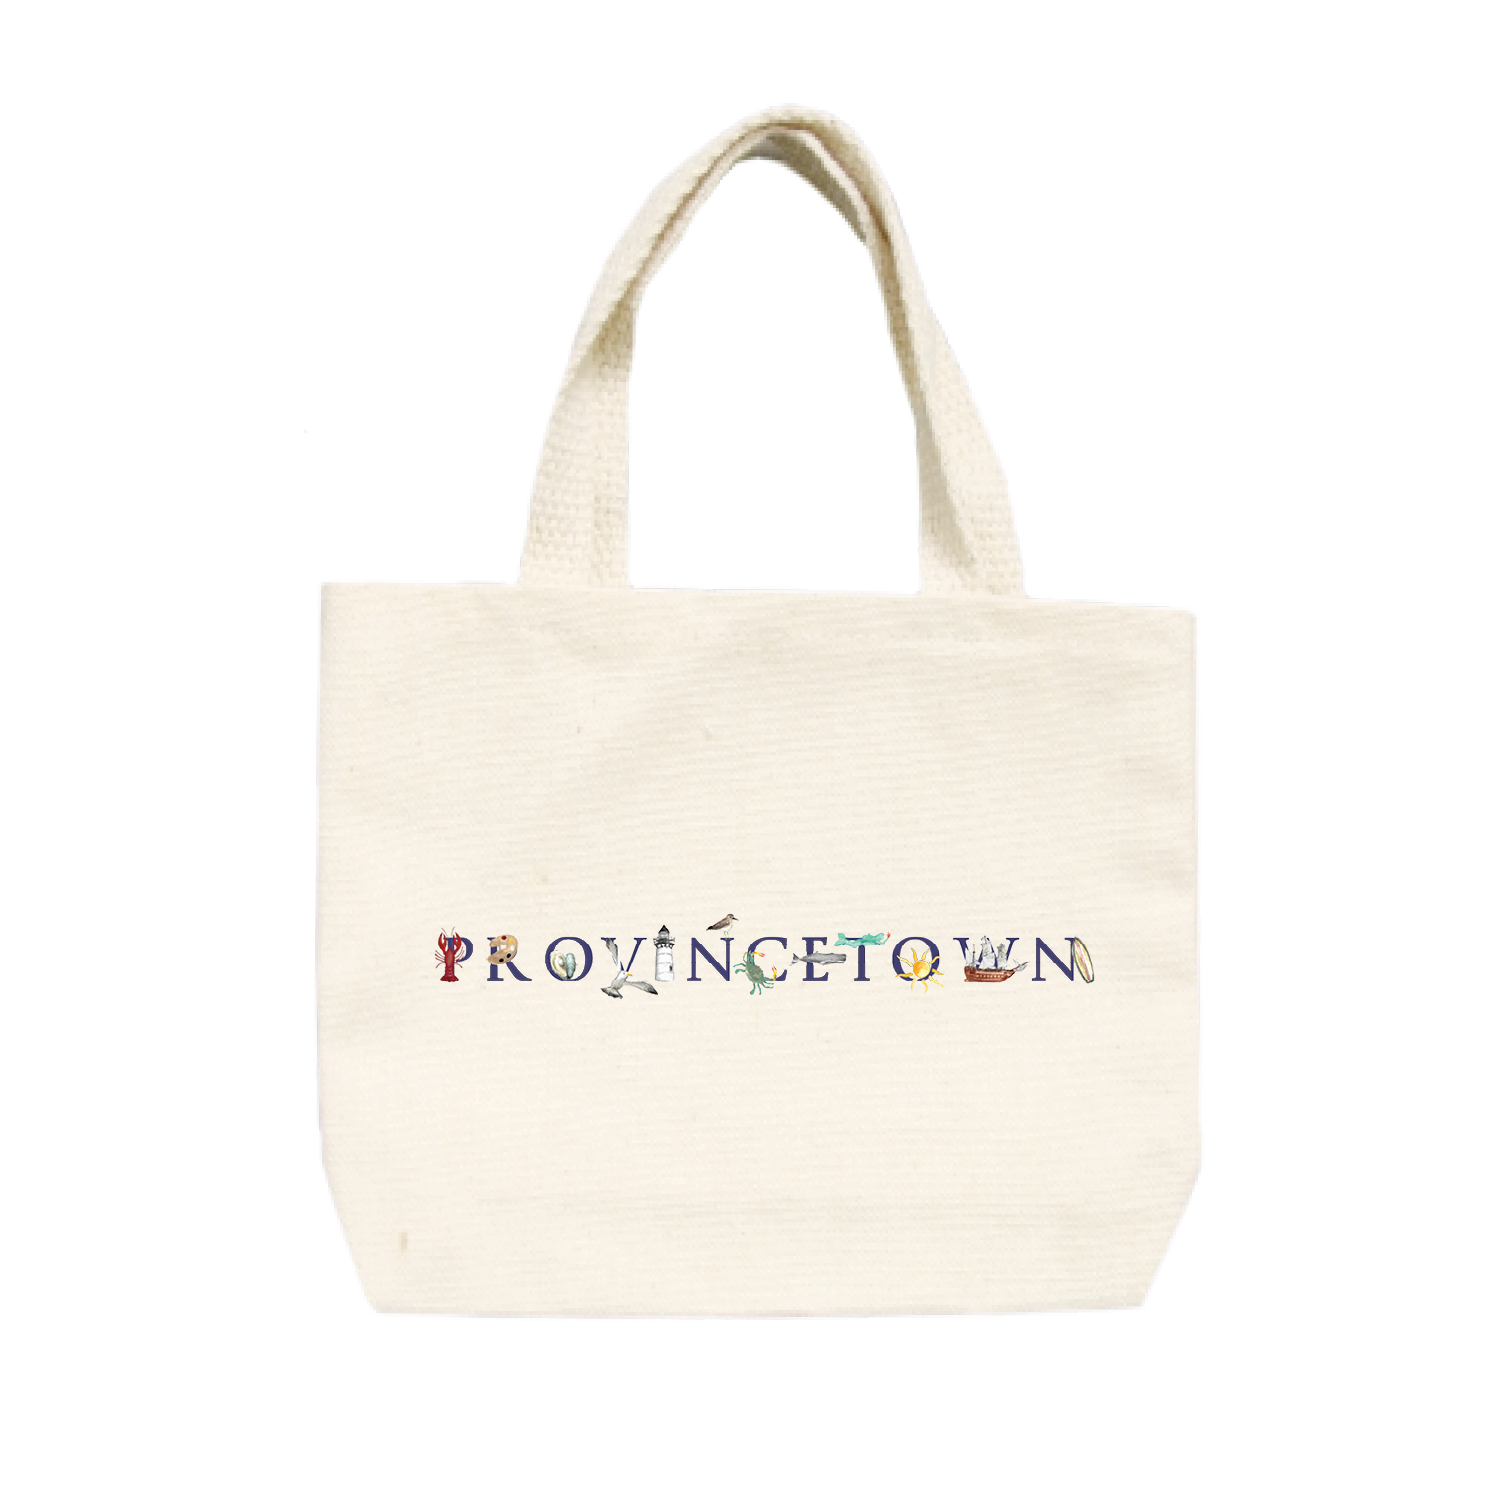 Provincetown small tote